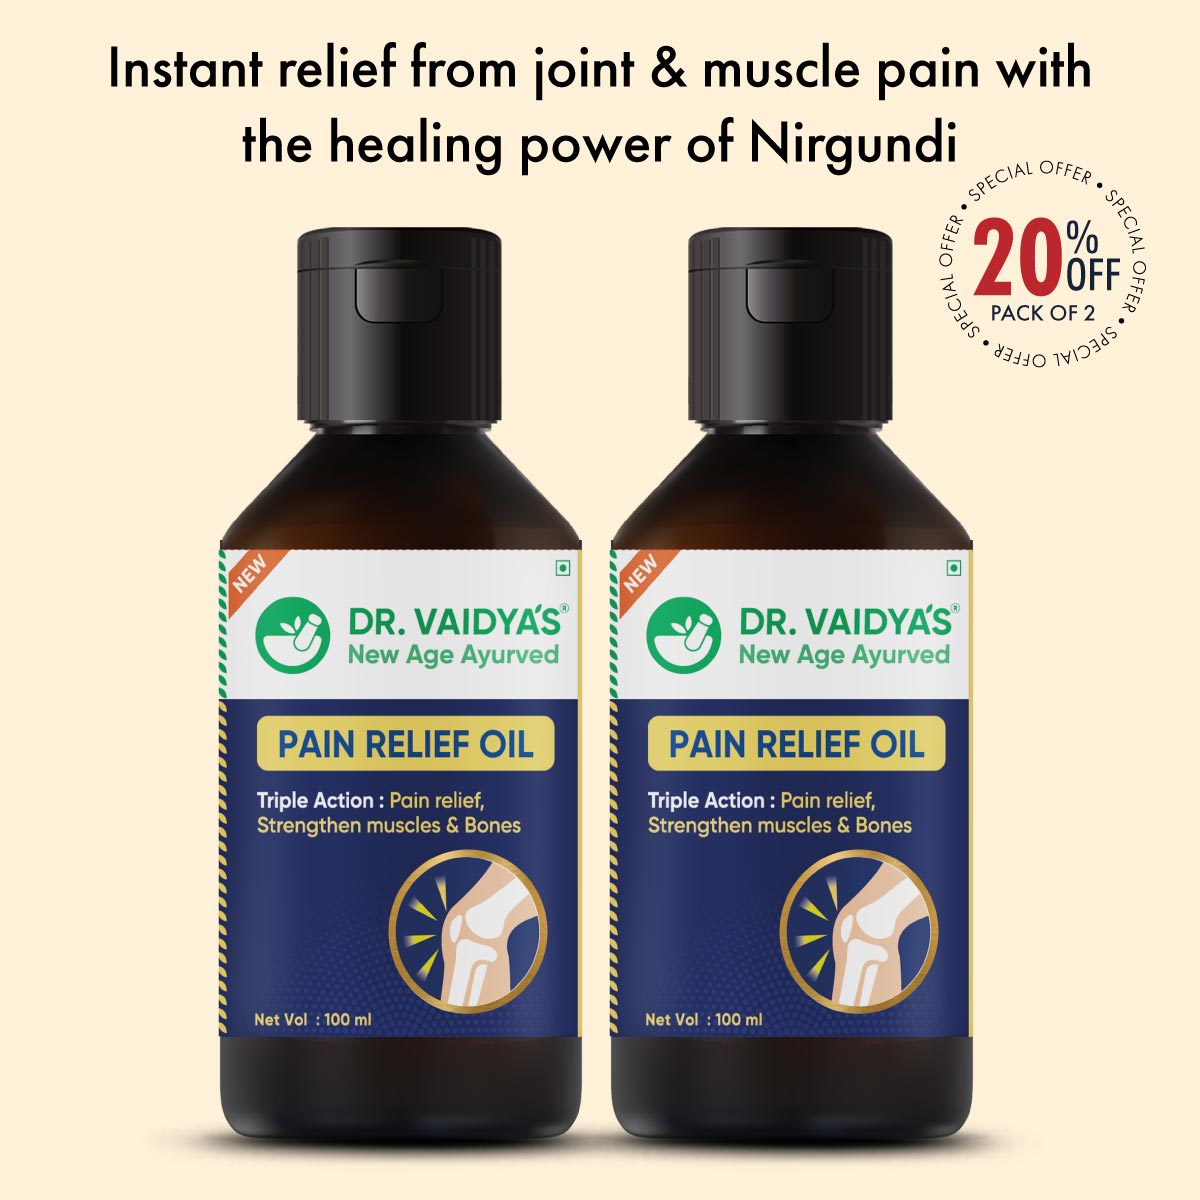 Pain Relief Oil: Ayurvedic Oil For Relief From Joint & Muscle Pain